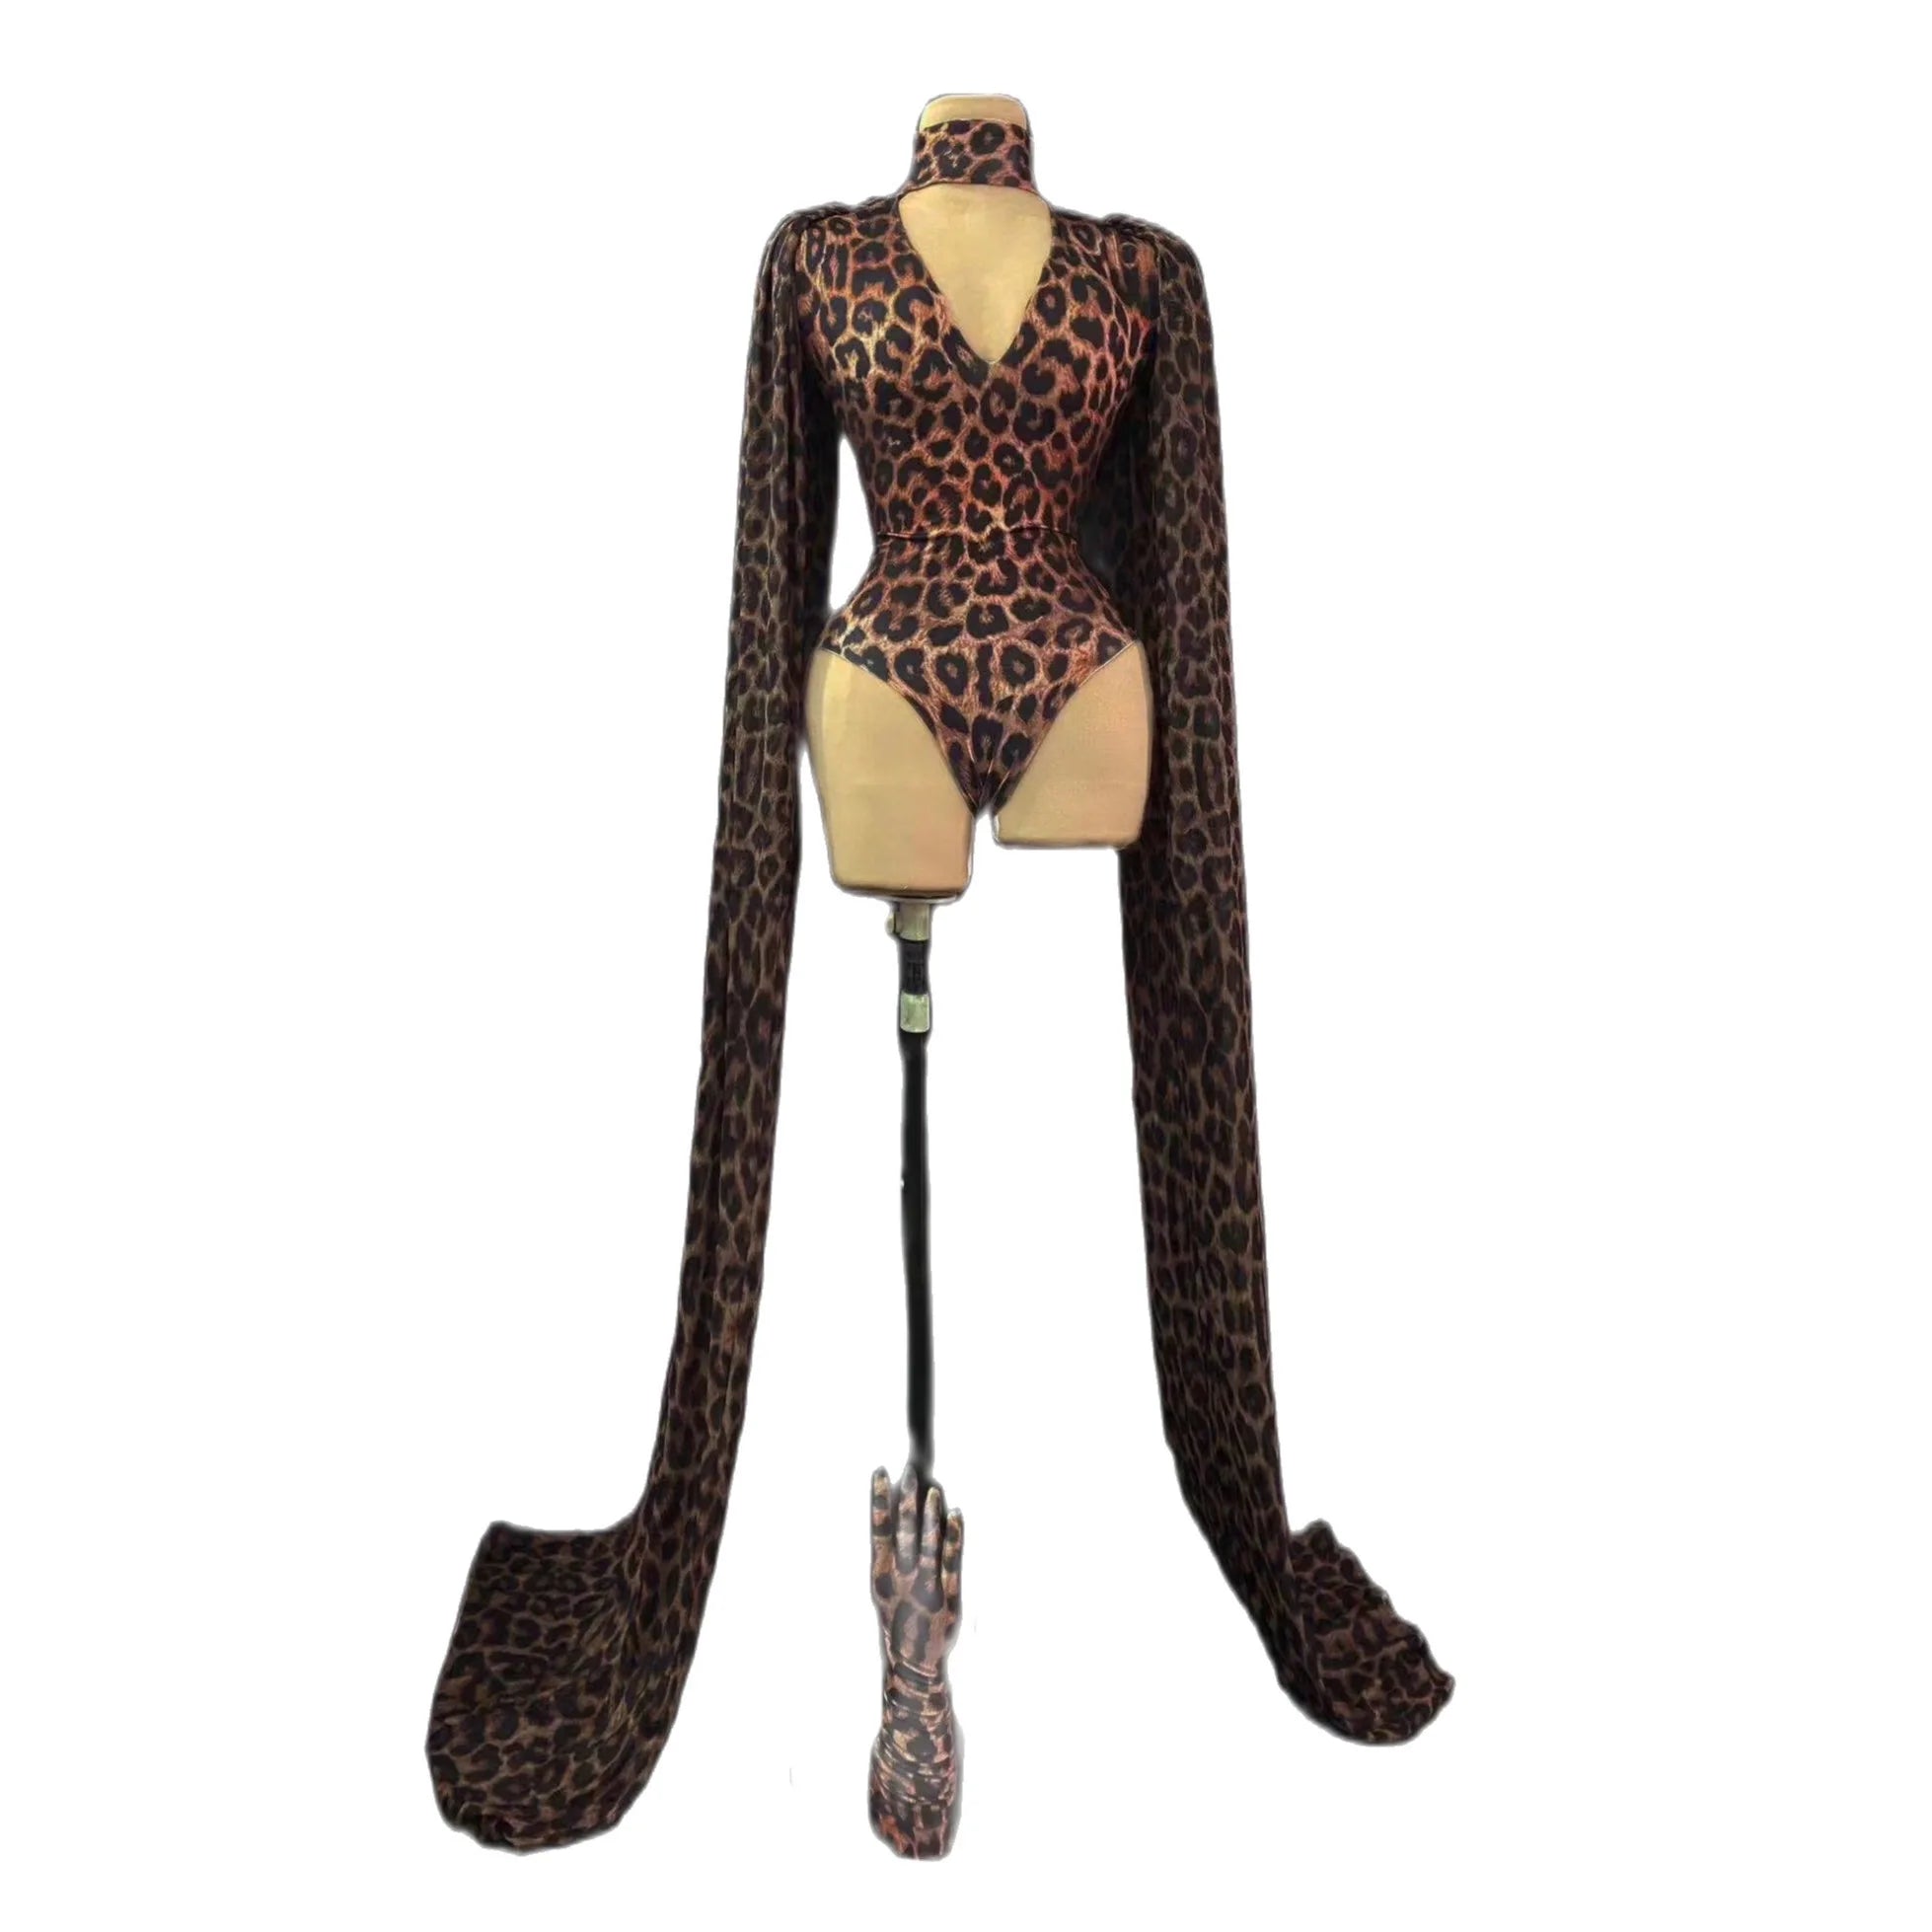 Sexy Bodysuits For Women Stage Perform Costume Carnival Drag Queen Outfits Leopard V-Neck Long Sleeves Party Prom Clothing